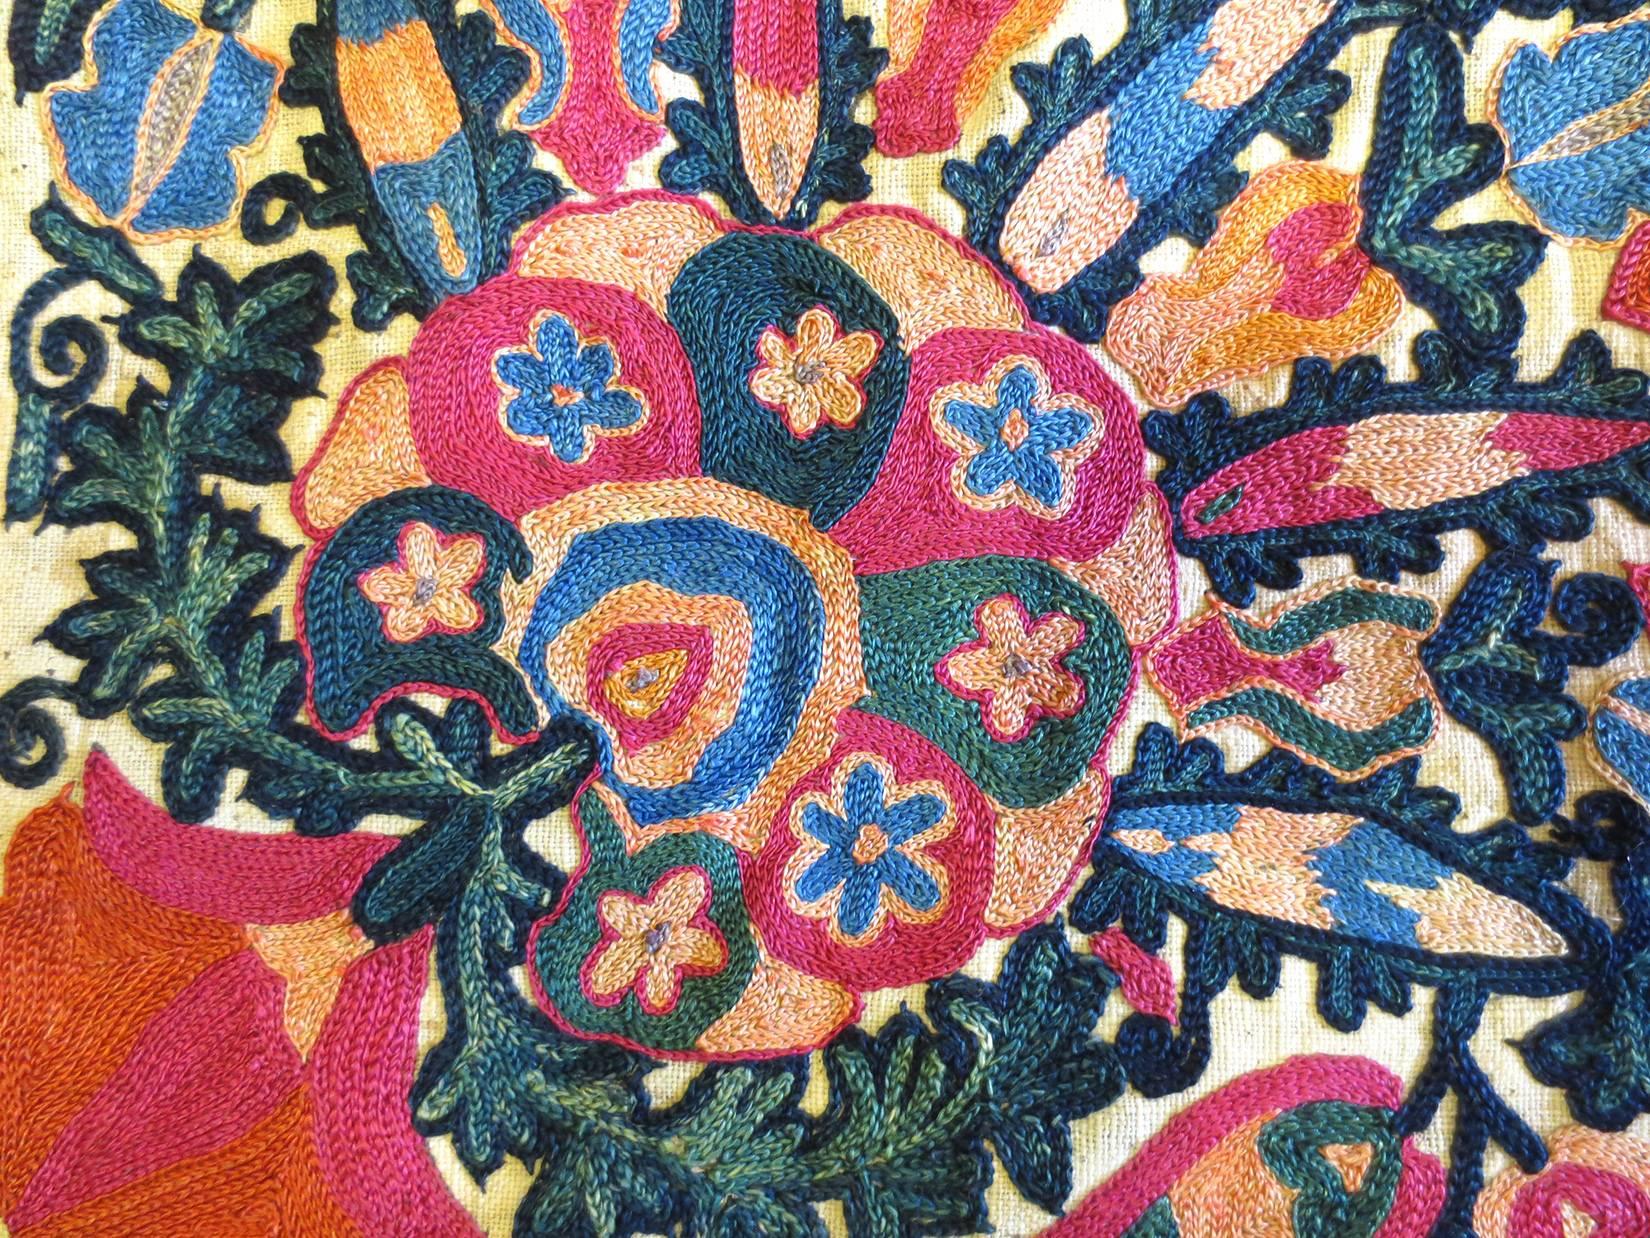 This is a lovely antique Suzani textile from Uzbekistan, circa 1850s, with silk embroidery on linen fabric.